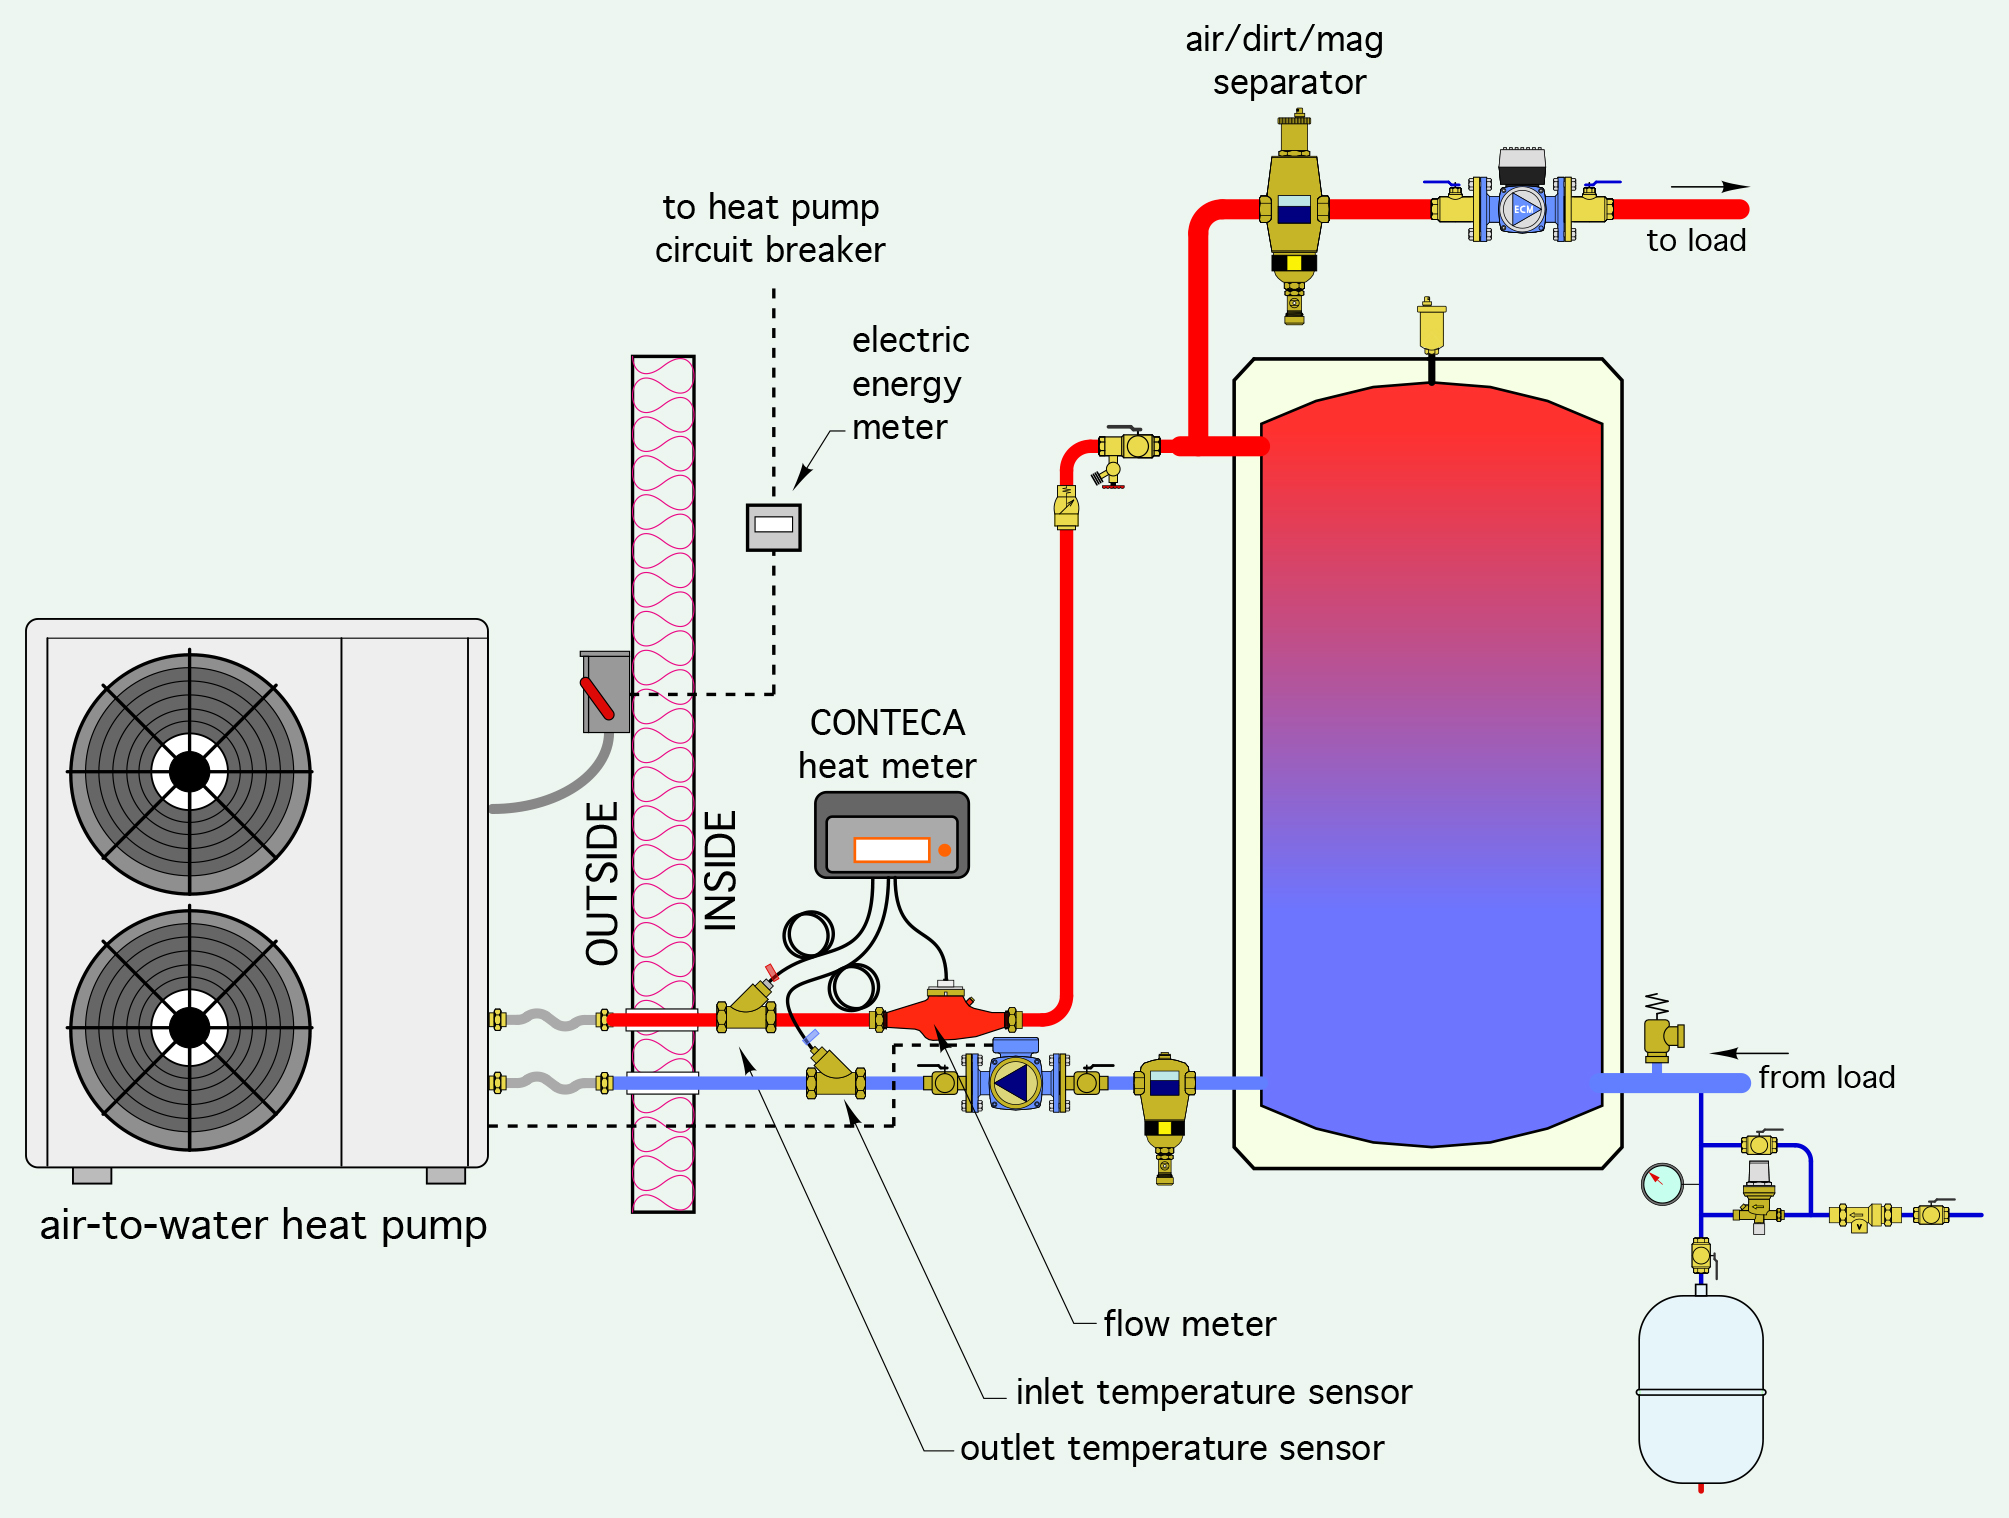 AIR TO WATER HEAT PUMPS